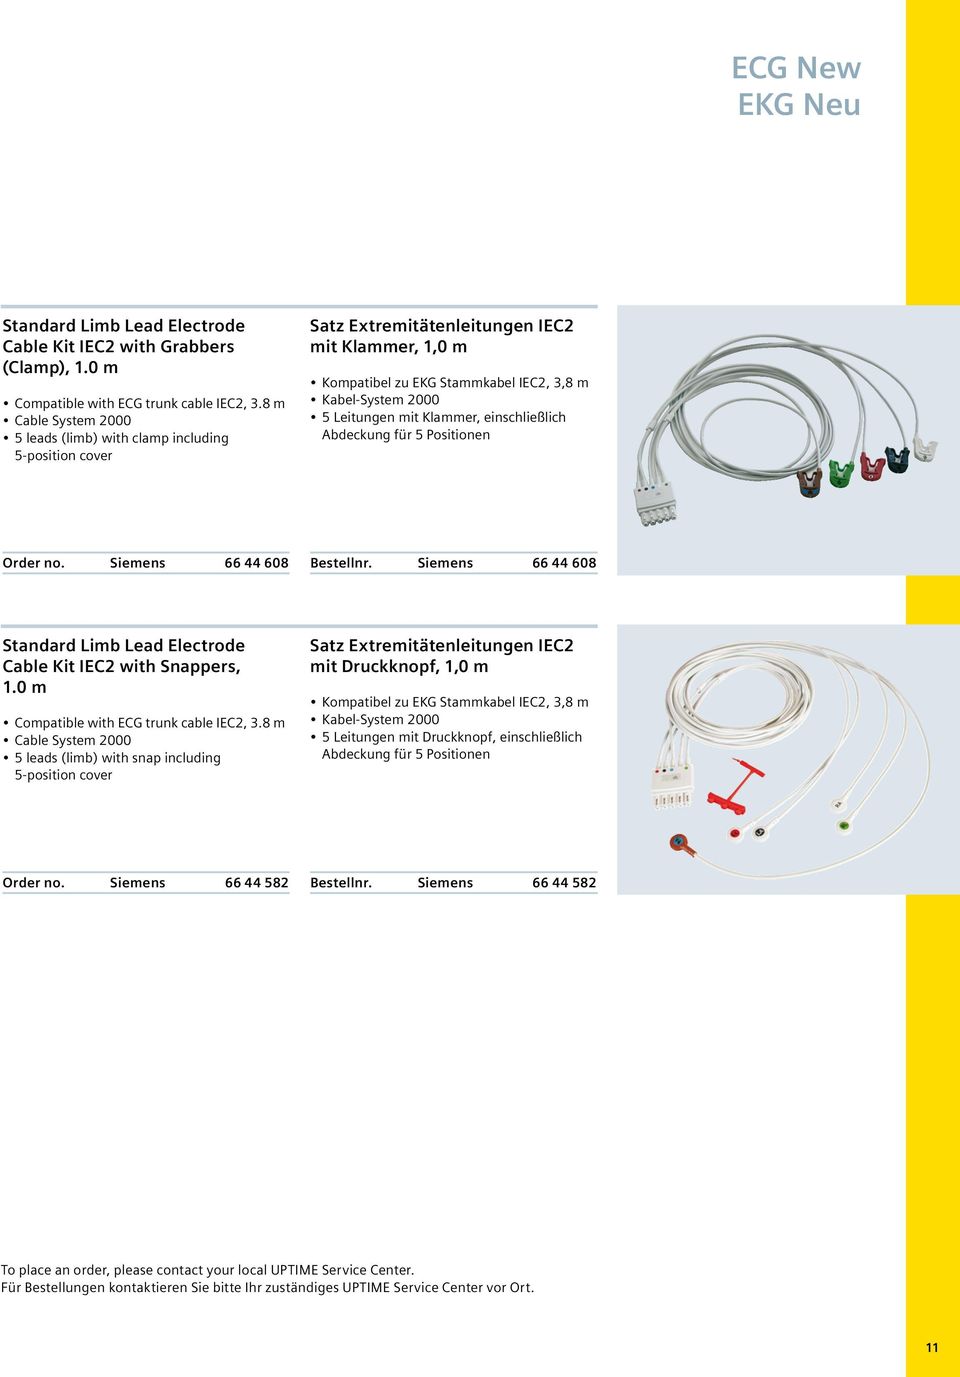 für 5 Positionen Order no. Siemens 66 44 608 Bestellnr. Siemens 66 44 608 Standard Limb Lead Electrode Cable Kit IEC2 with Snappers, 1.0 m Compatible with ECG trunk cable IEC2, 3.